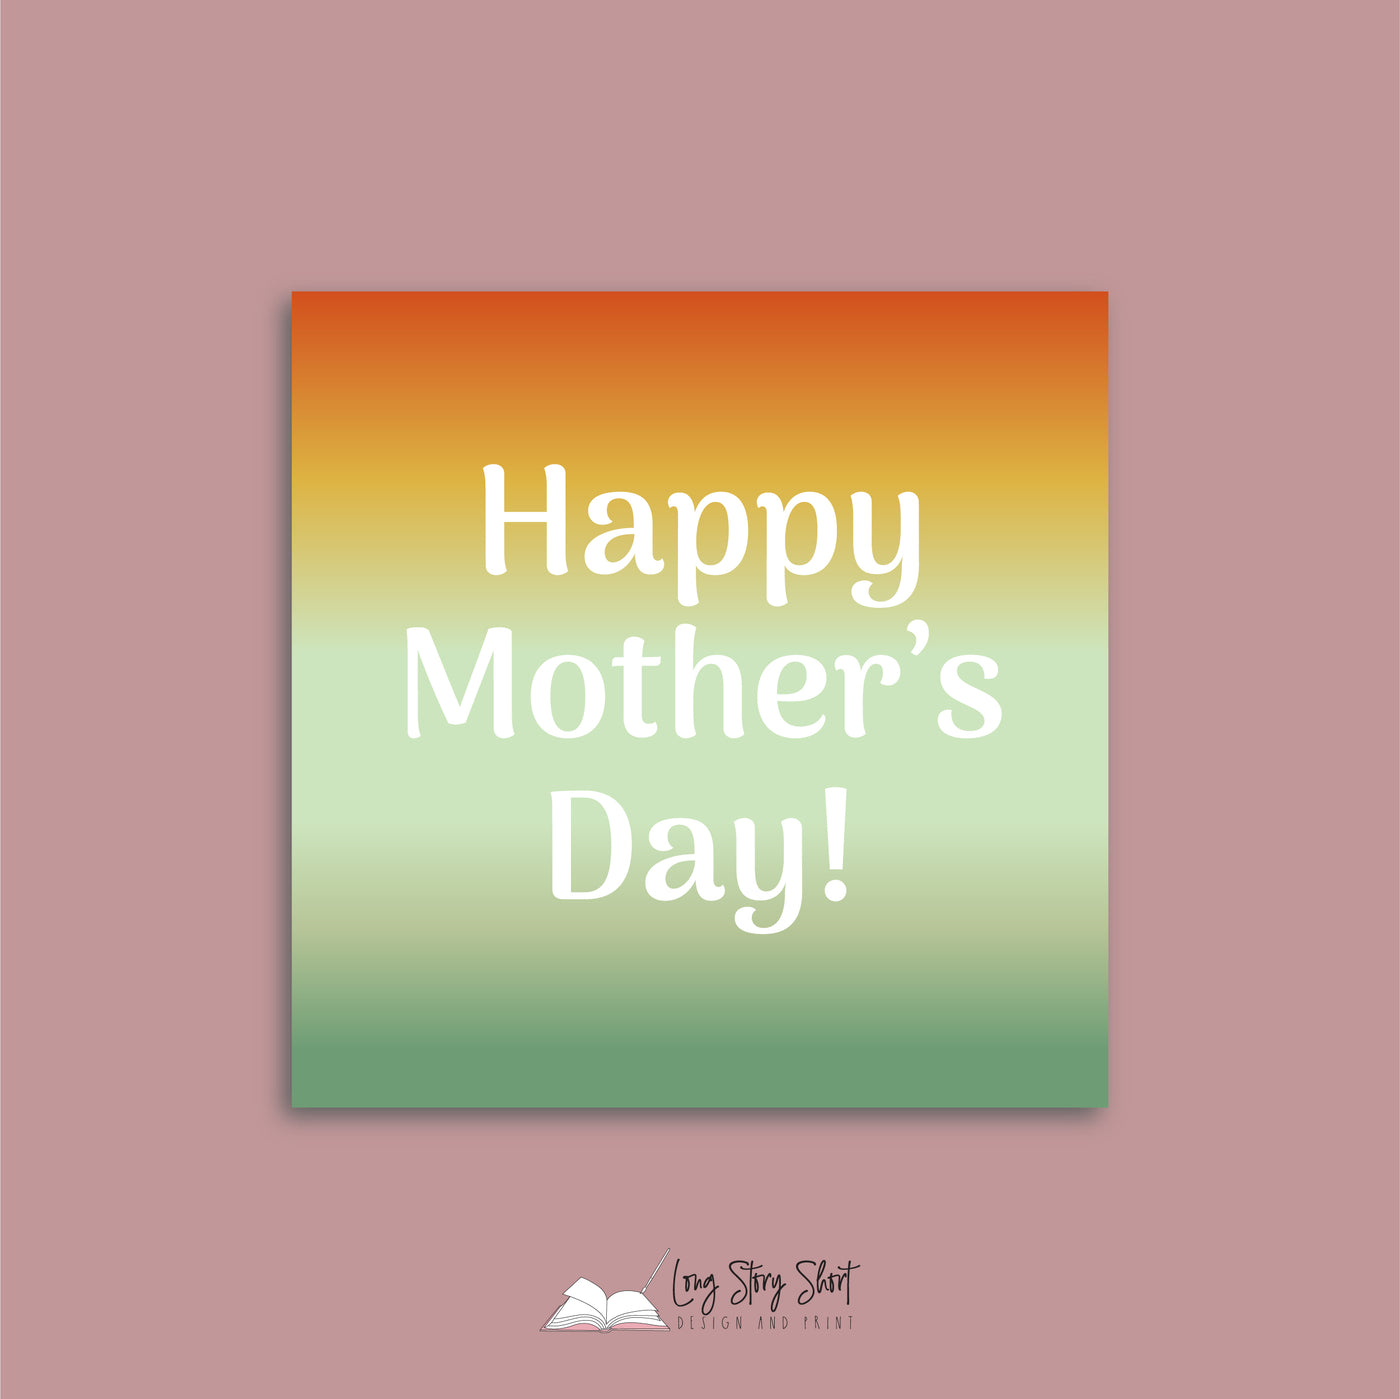 Happy Mother's Day Colourful pattern Square Vinyl Label Pack